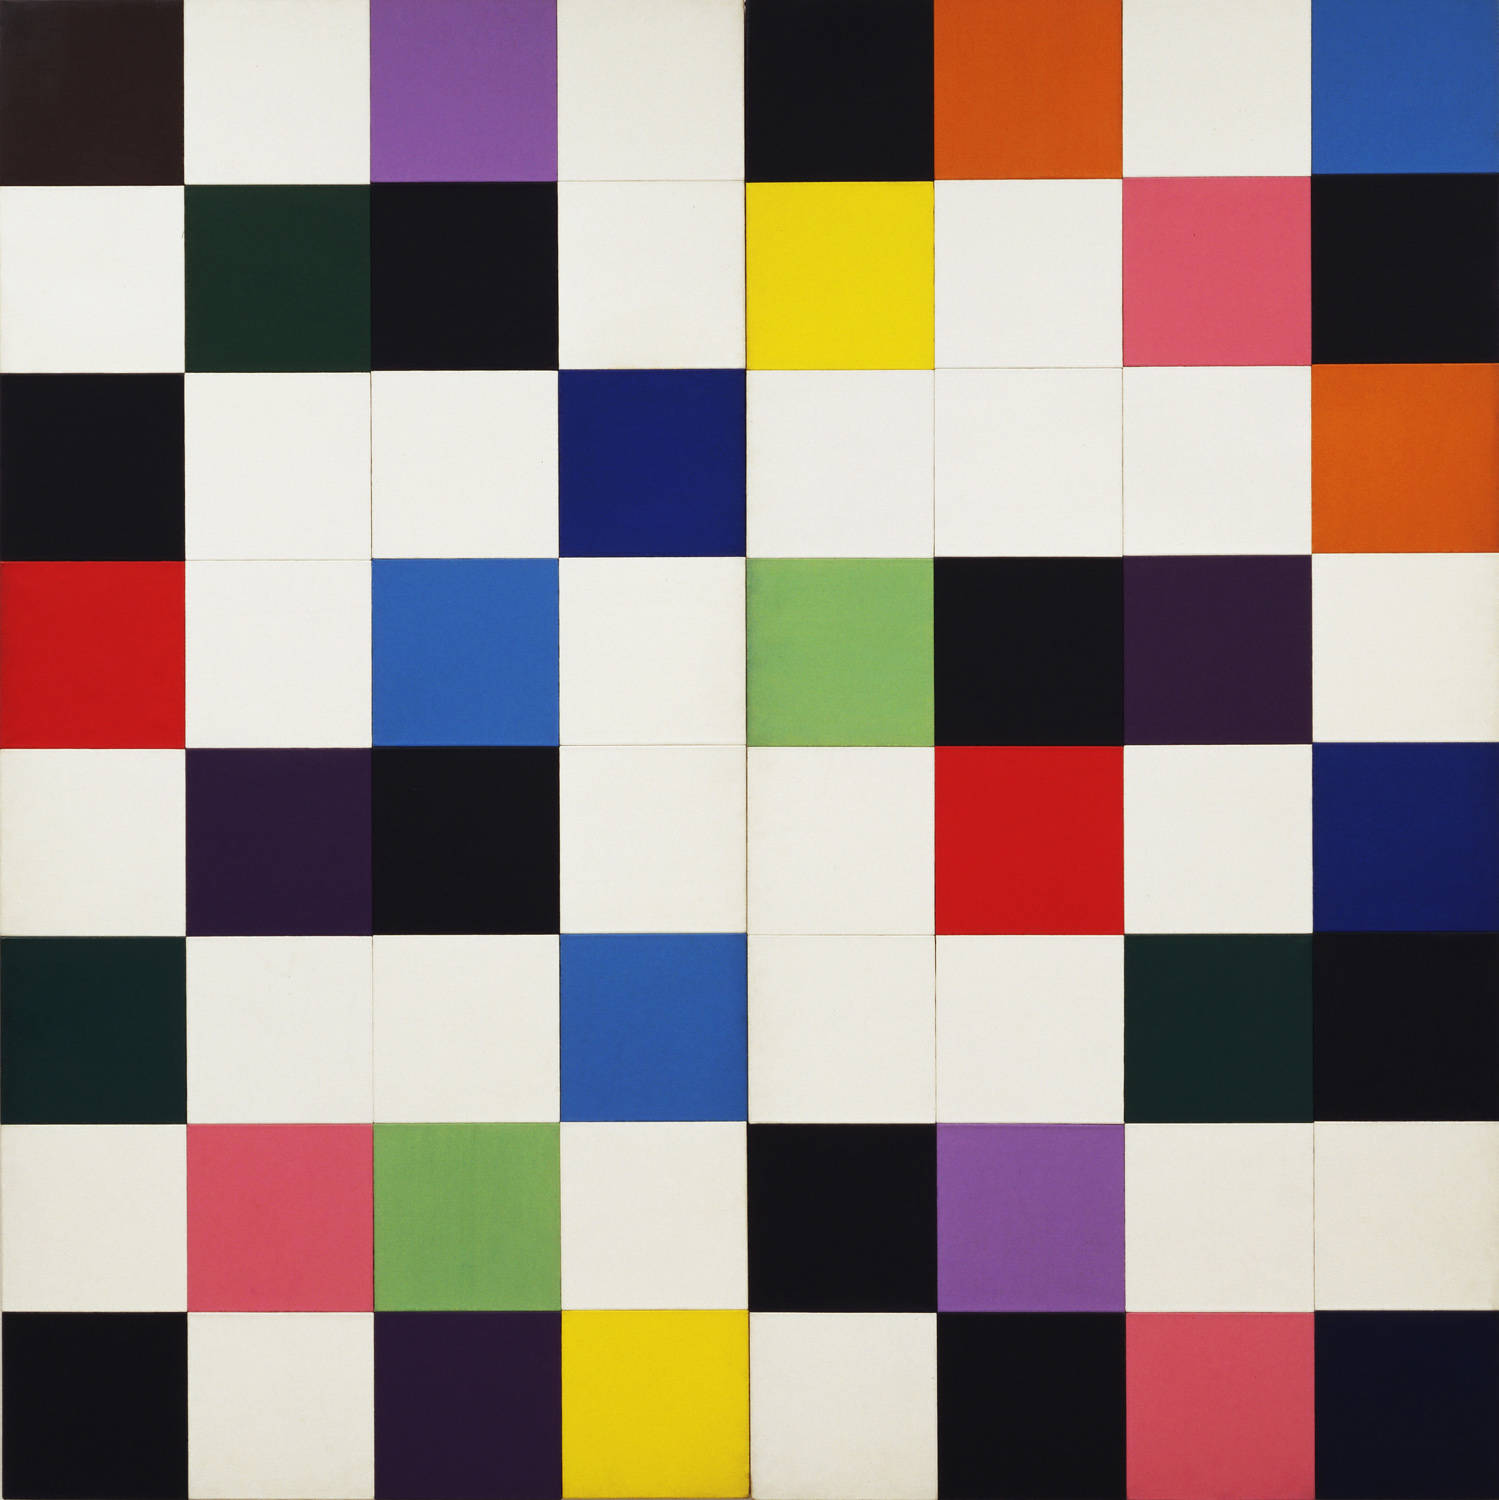 Ellsworth Kelly - Colors for a Large Wall